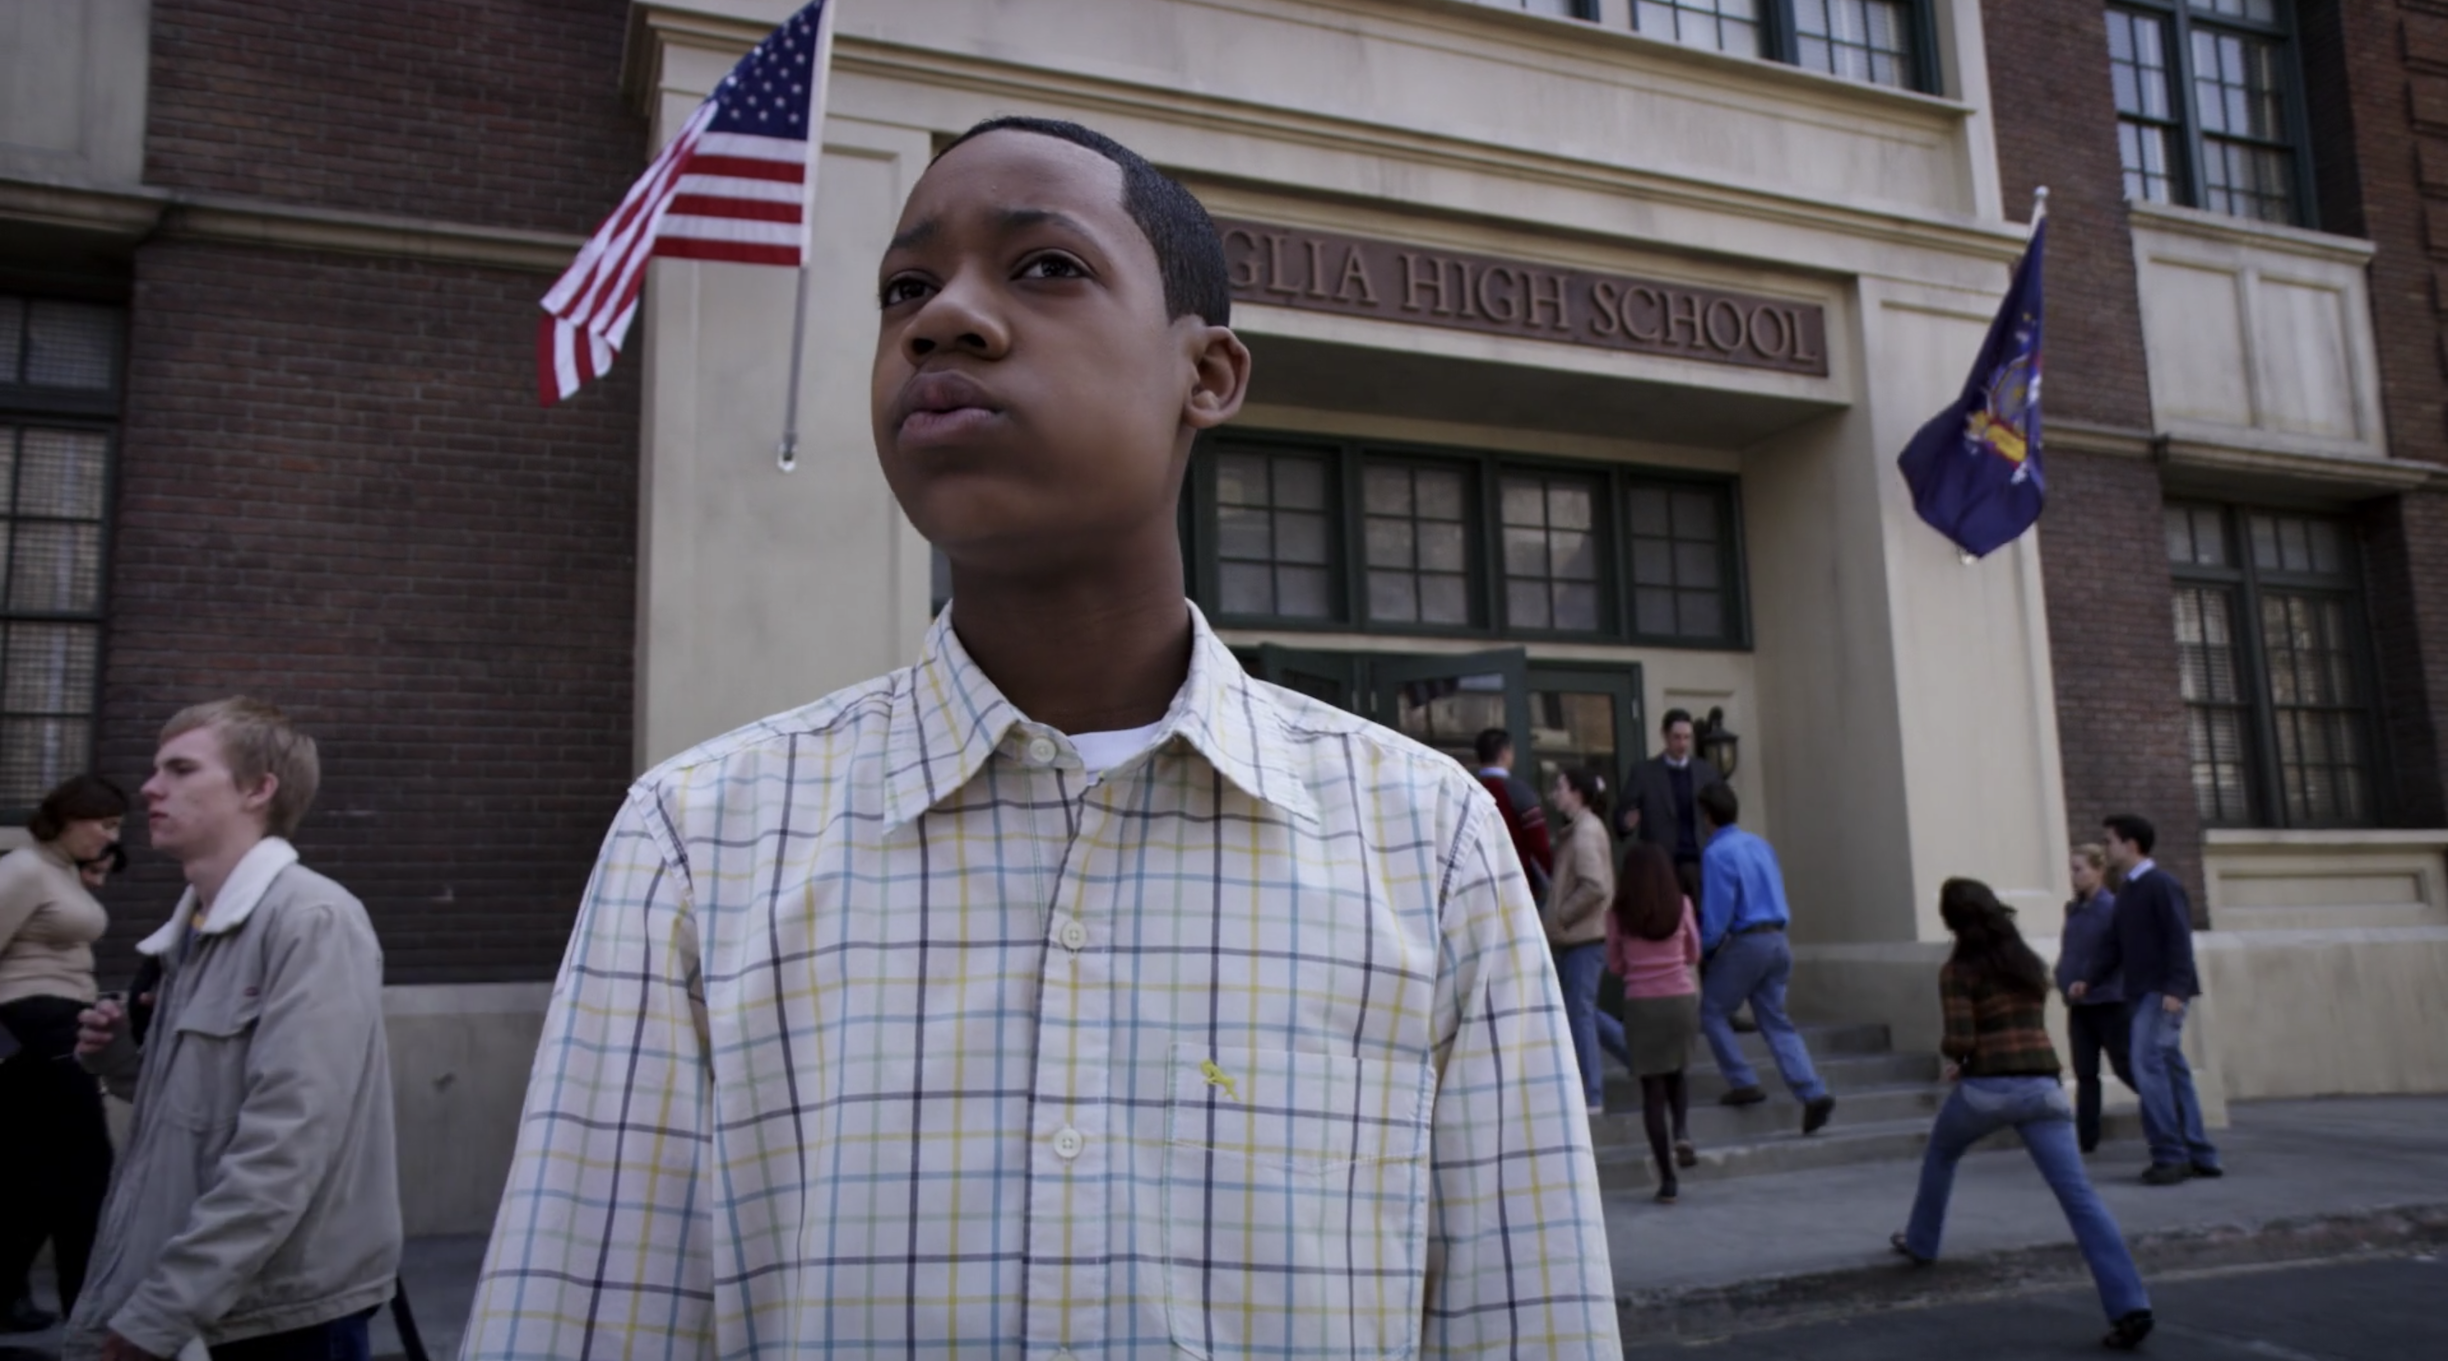 Tyler James Williams stands outside a school